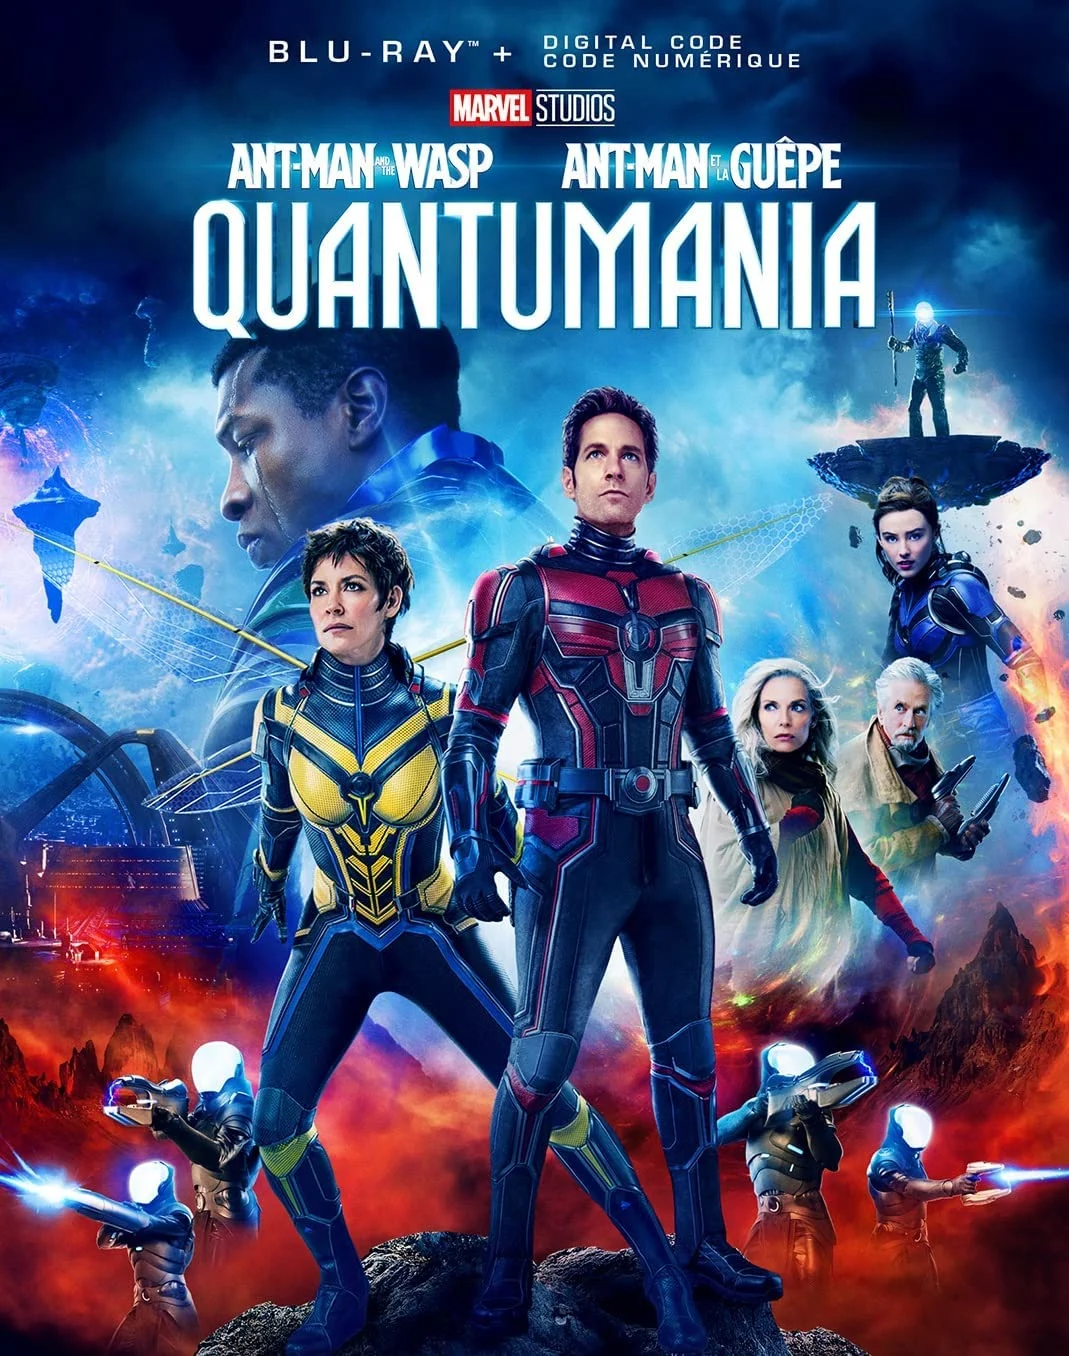 Ant-Man and the Wasp: Quantumania (Blu-ray) on MovieShack